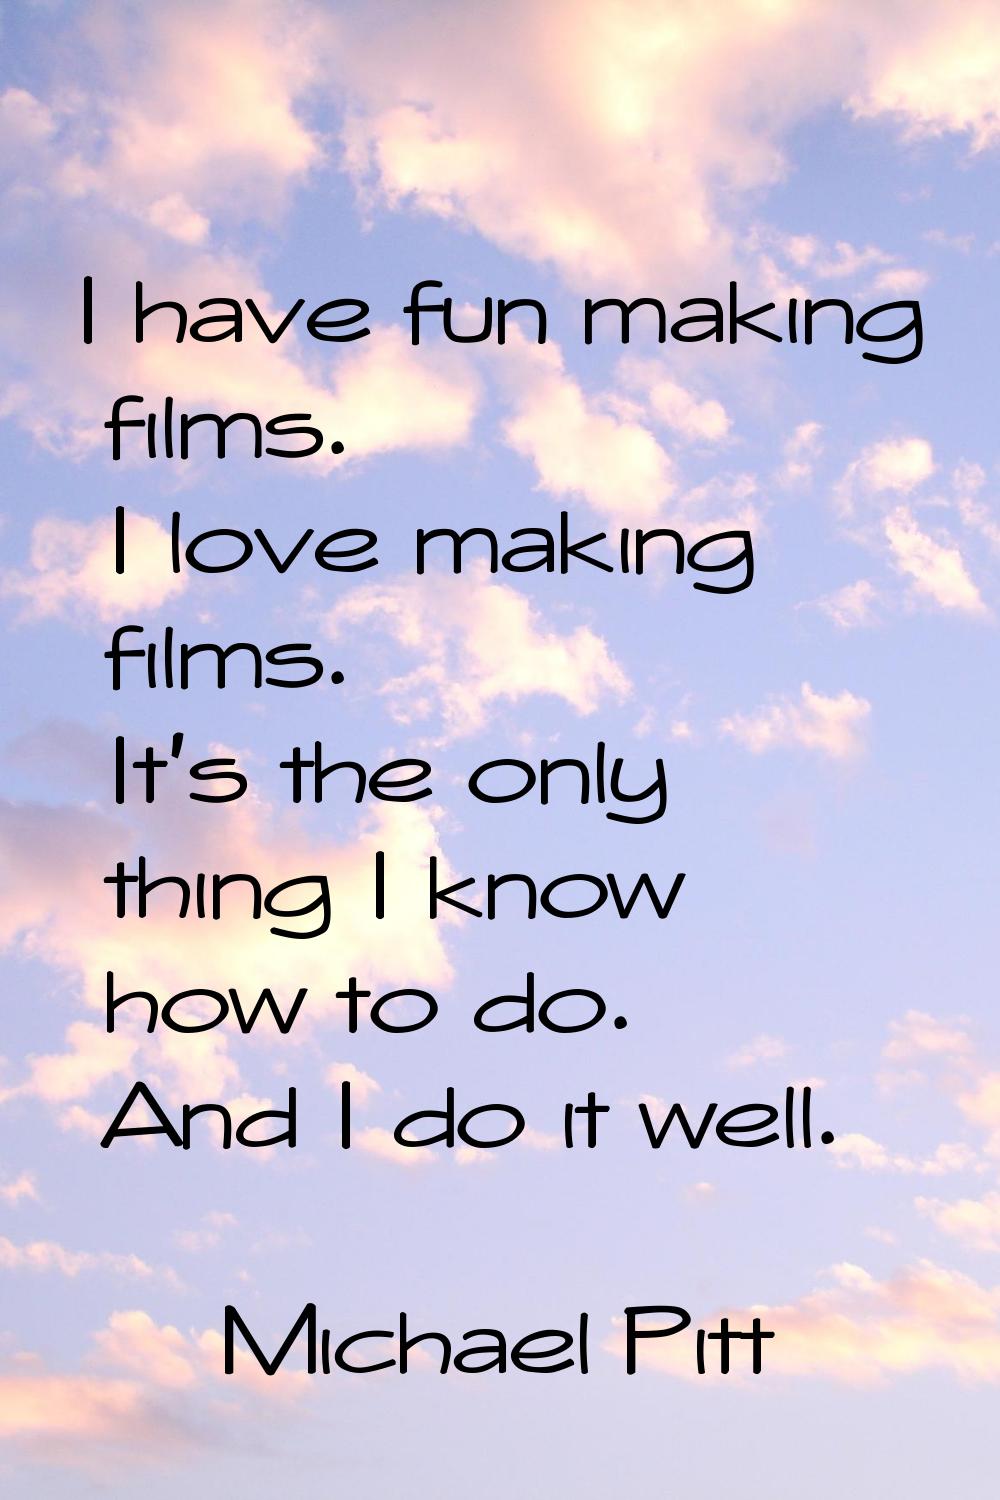 I have fun making films. I love making films. It's the only thing I know how to do. And I do it wel